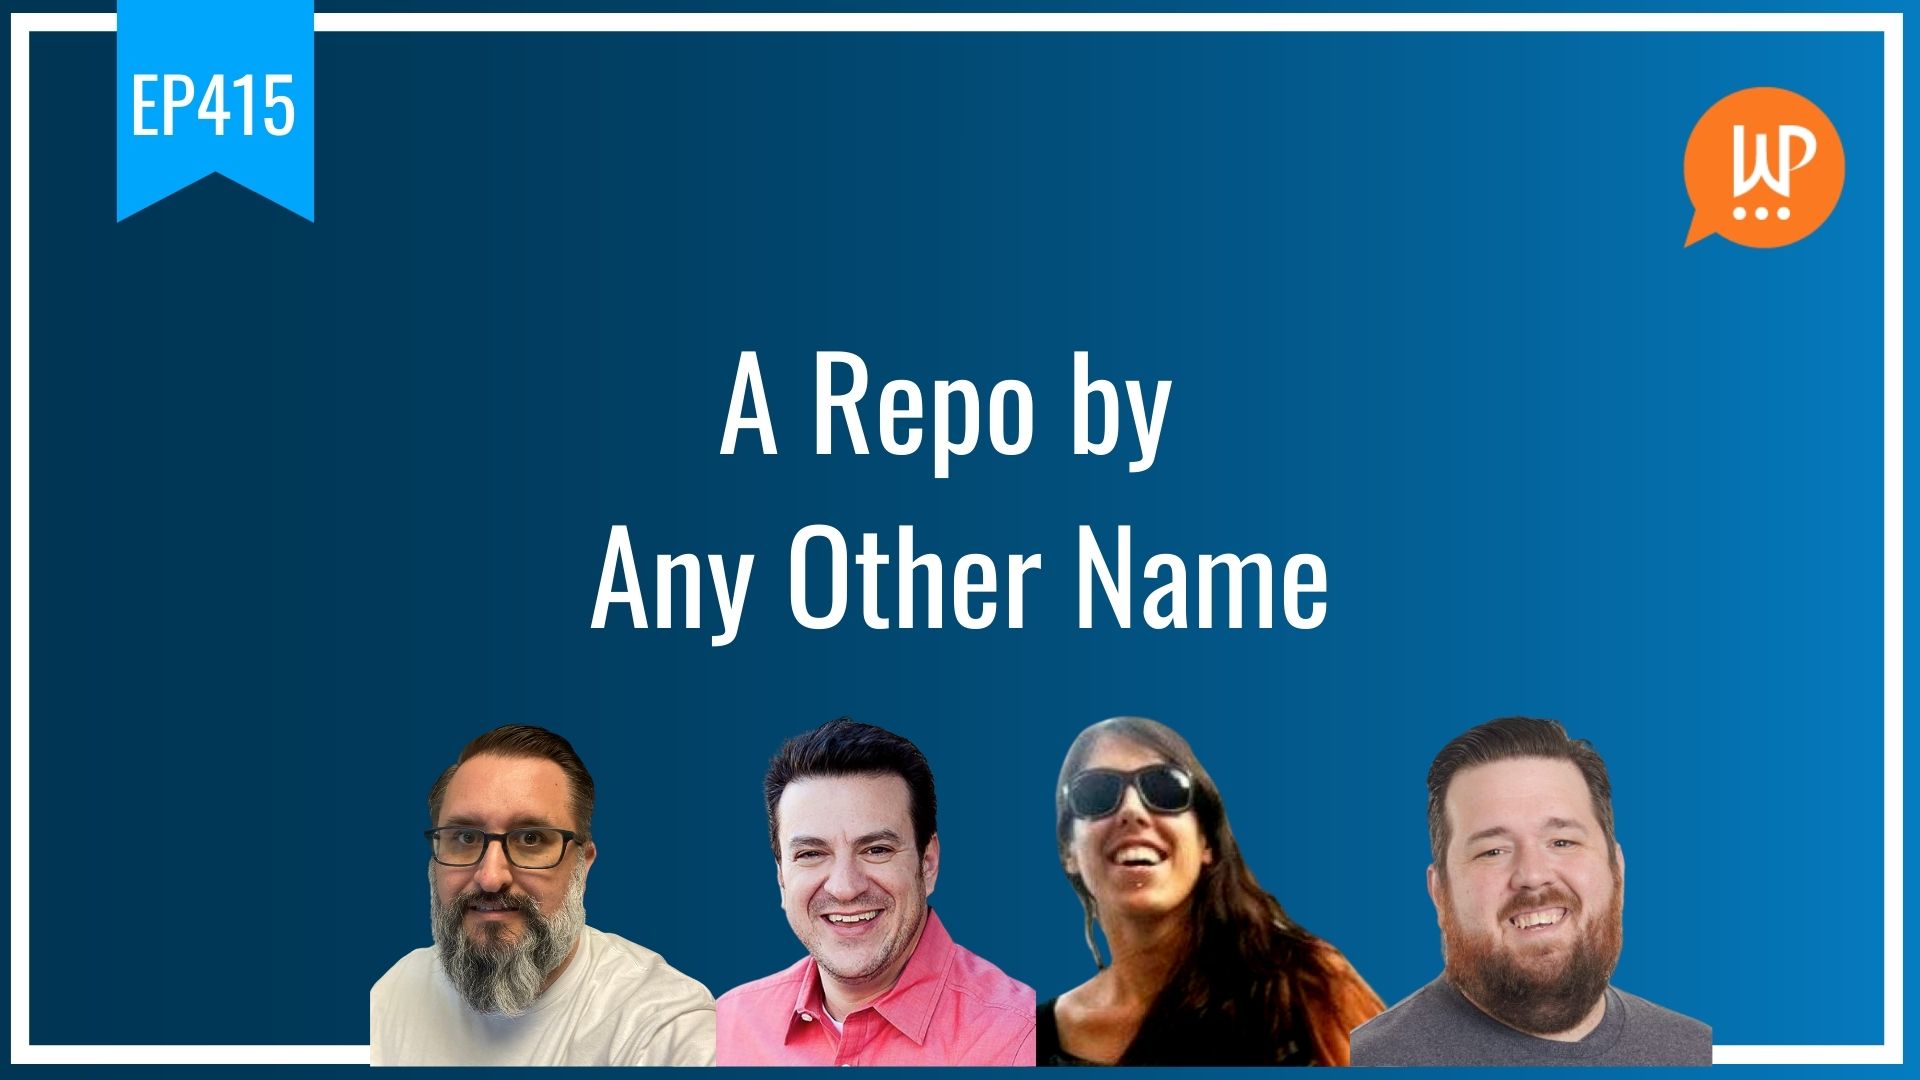 EP415 – A Repo by Any Other Name